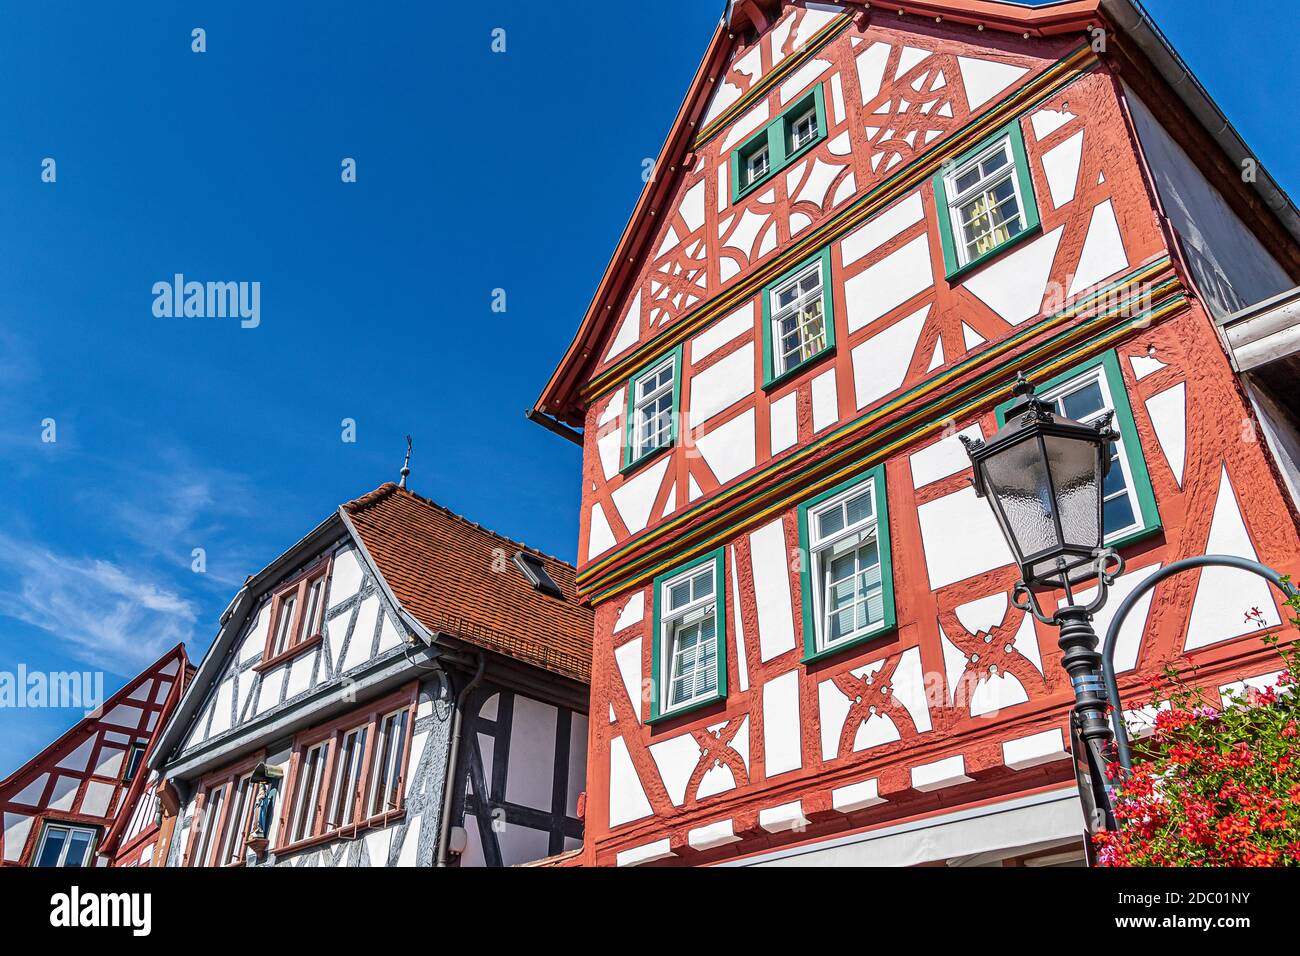 Picturesque half-timbered historic houses in Seligenstadt, Germany. The town lies on the banks of the Main and was of great importance in Carolingian times. Stock Photo